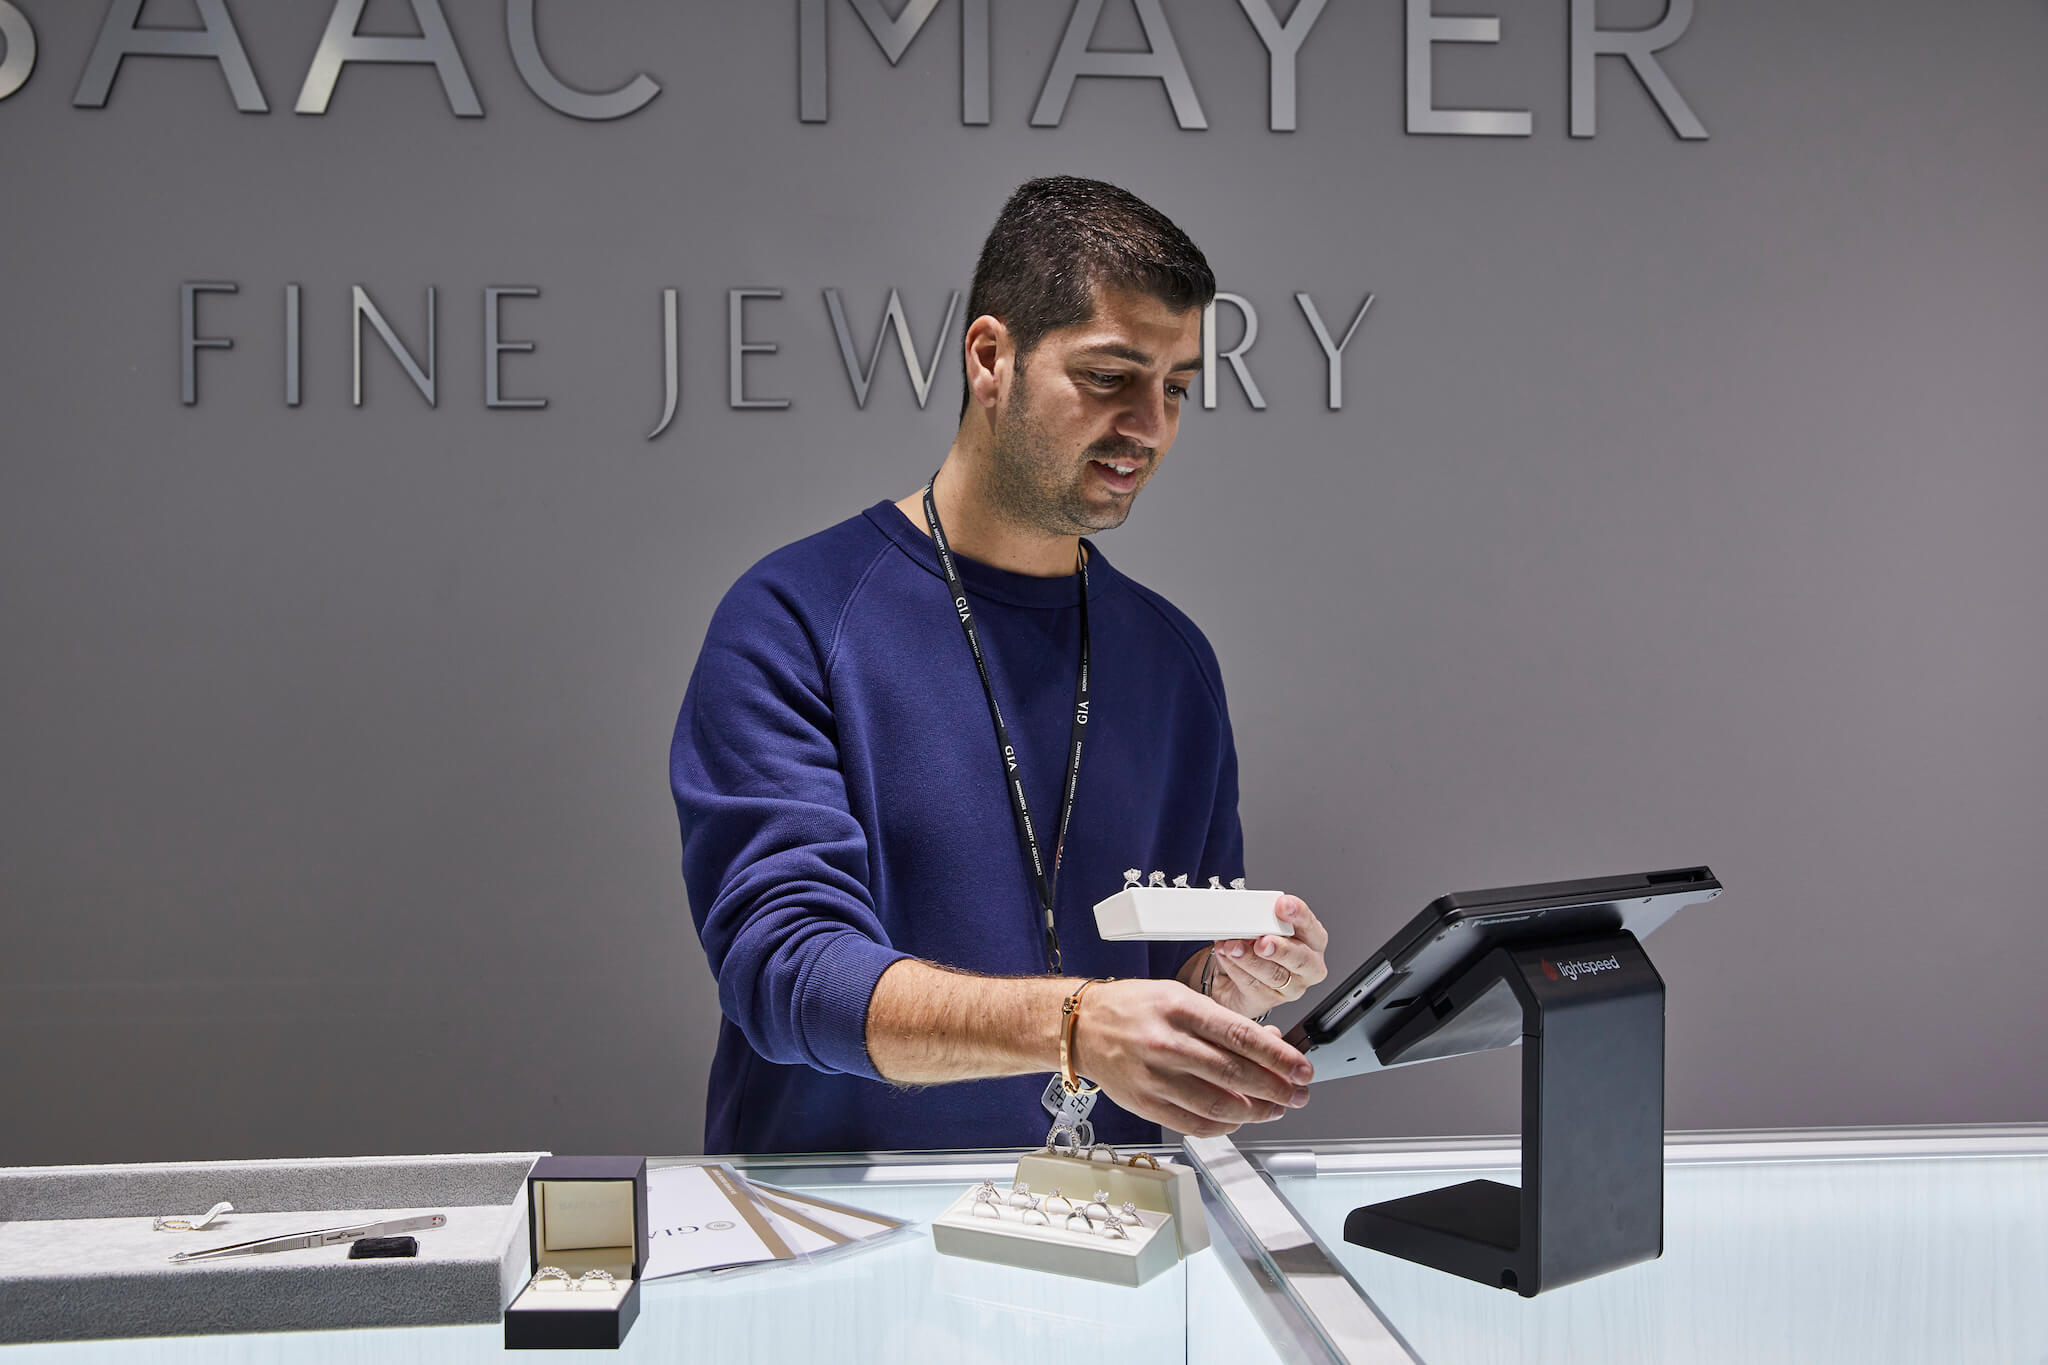 Adding a Personal Touch: How Isaac Mayer Fine Jewelry Elevates the Customer Experience